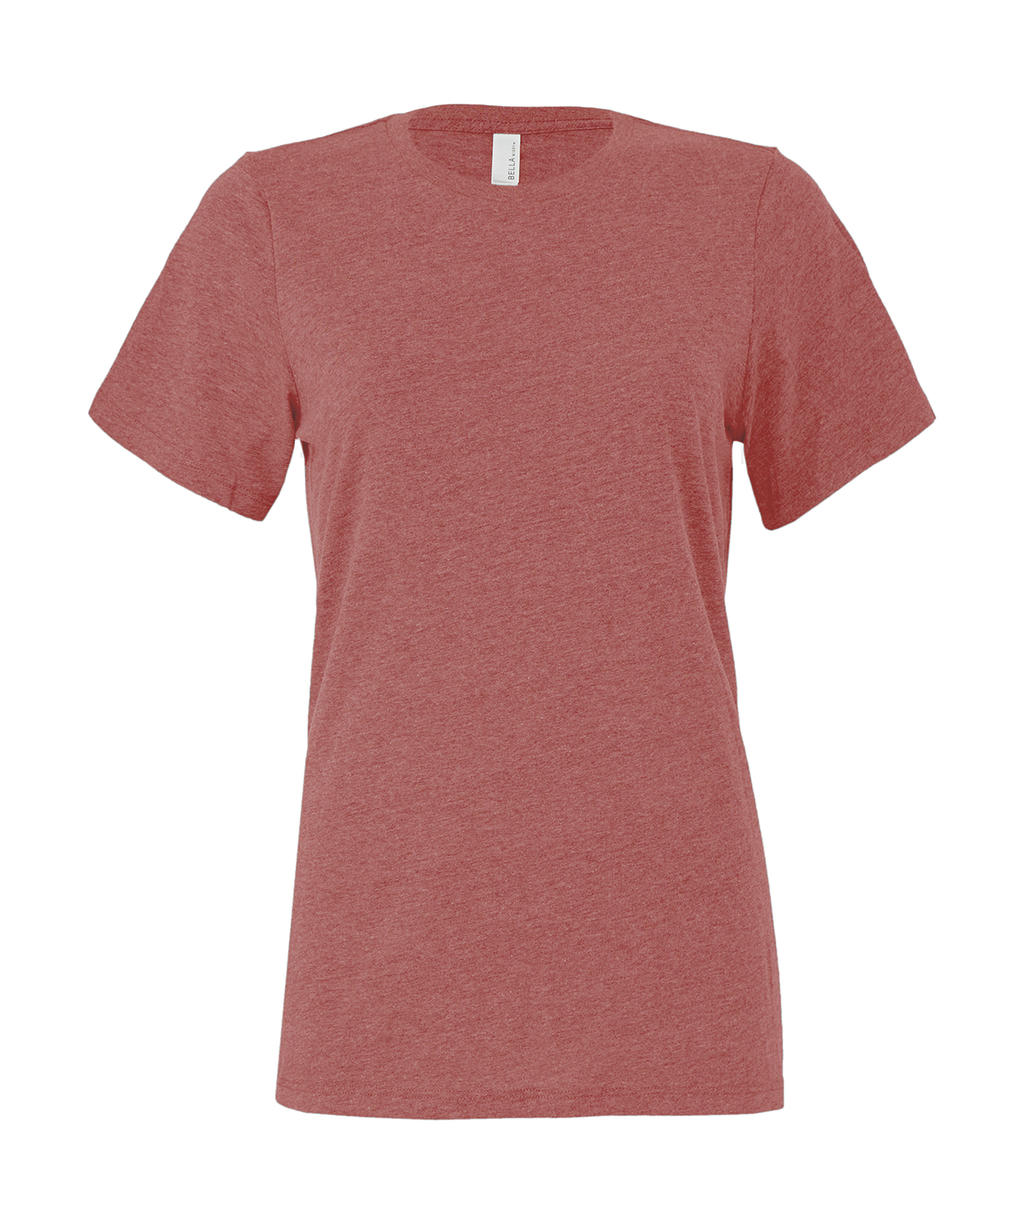  Womens Relaxed Jersey Short Sleeve Tee in Farbe Heather Mauve